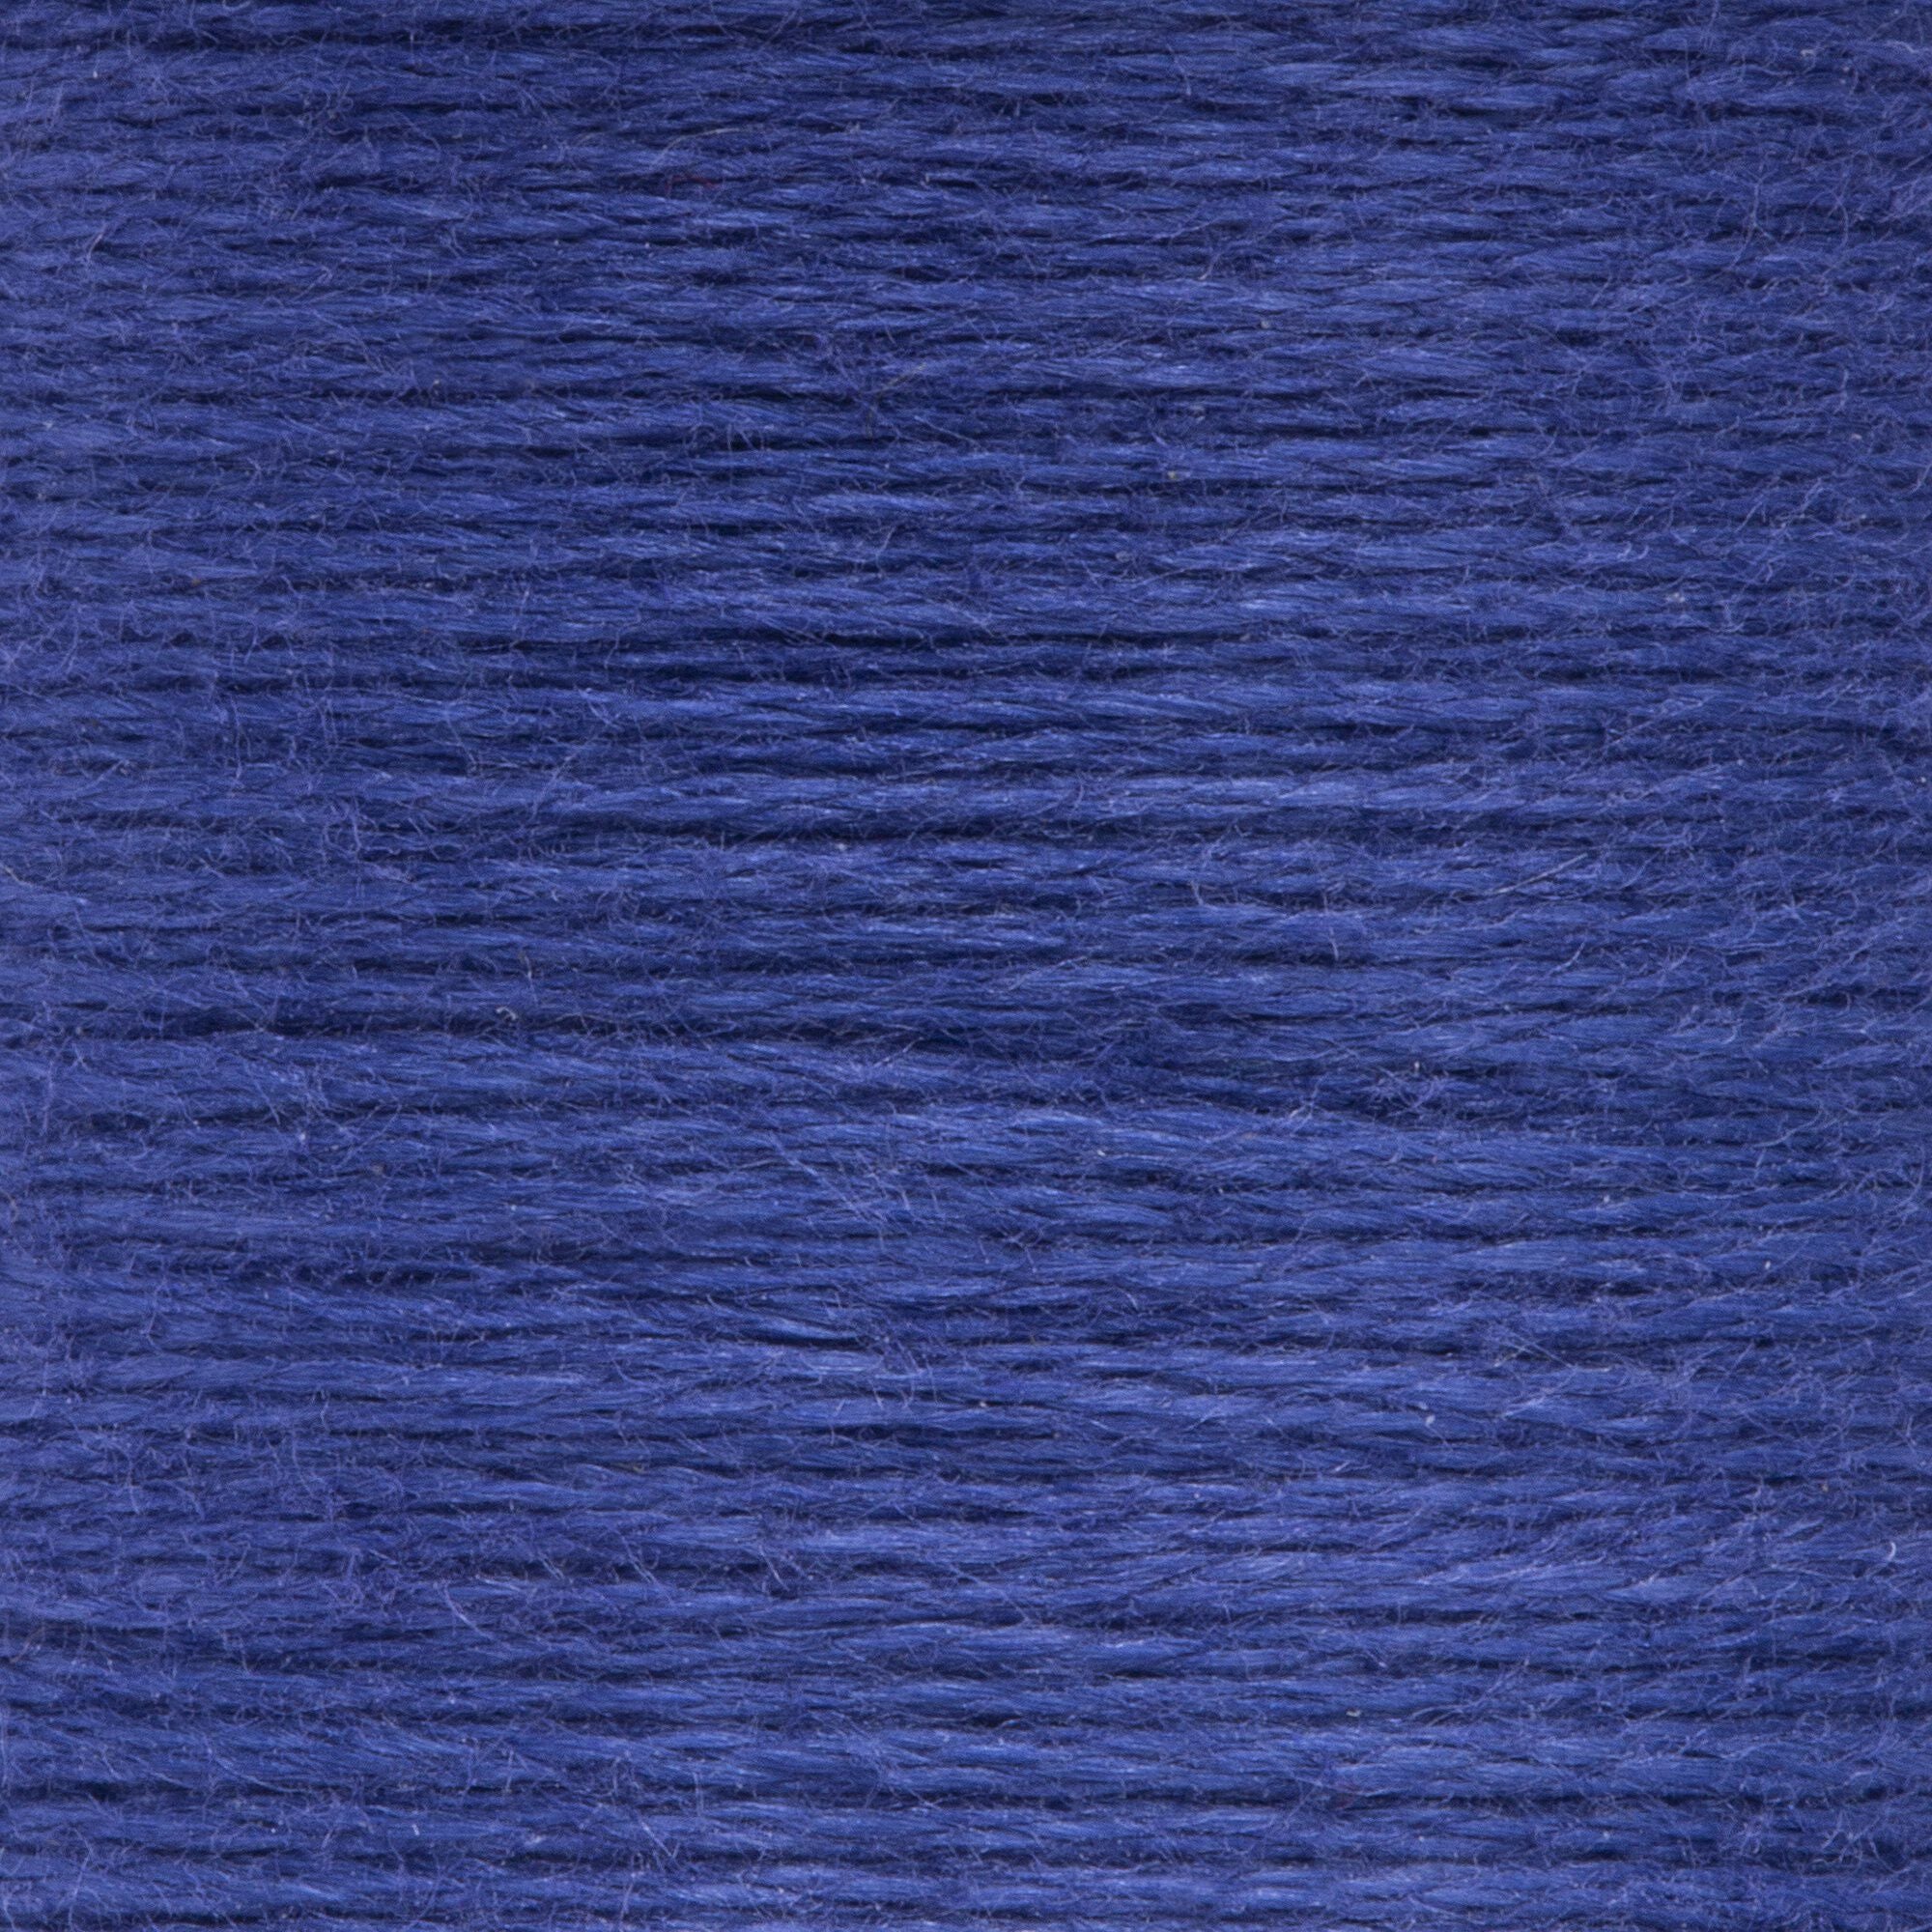 Anchor Embroidery Floss in Stormy Blue Vy Dk